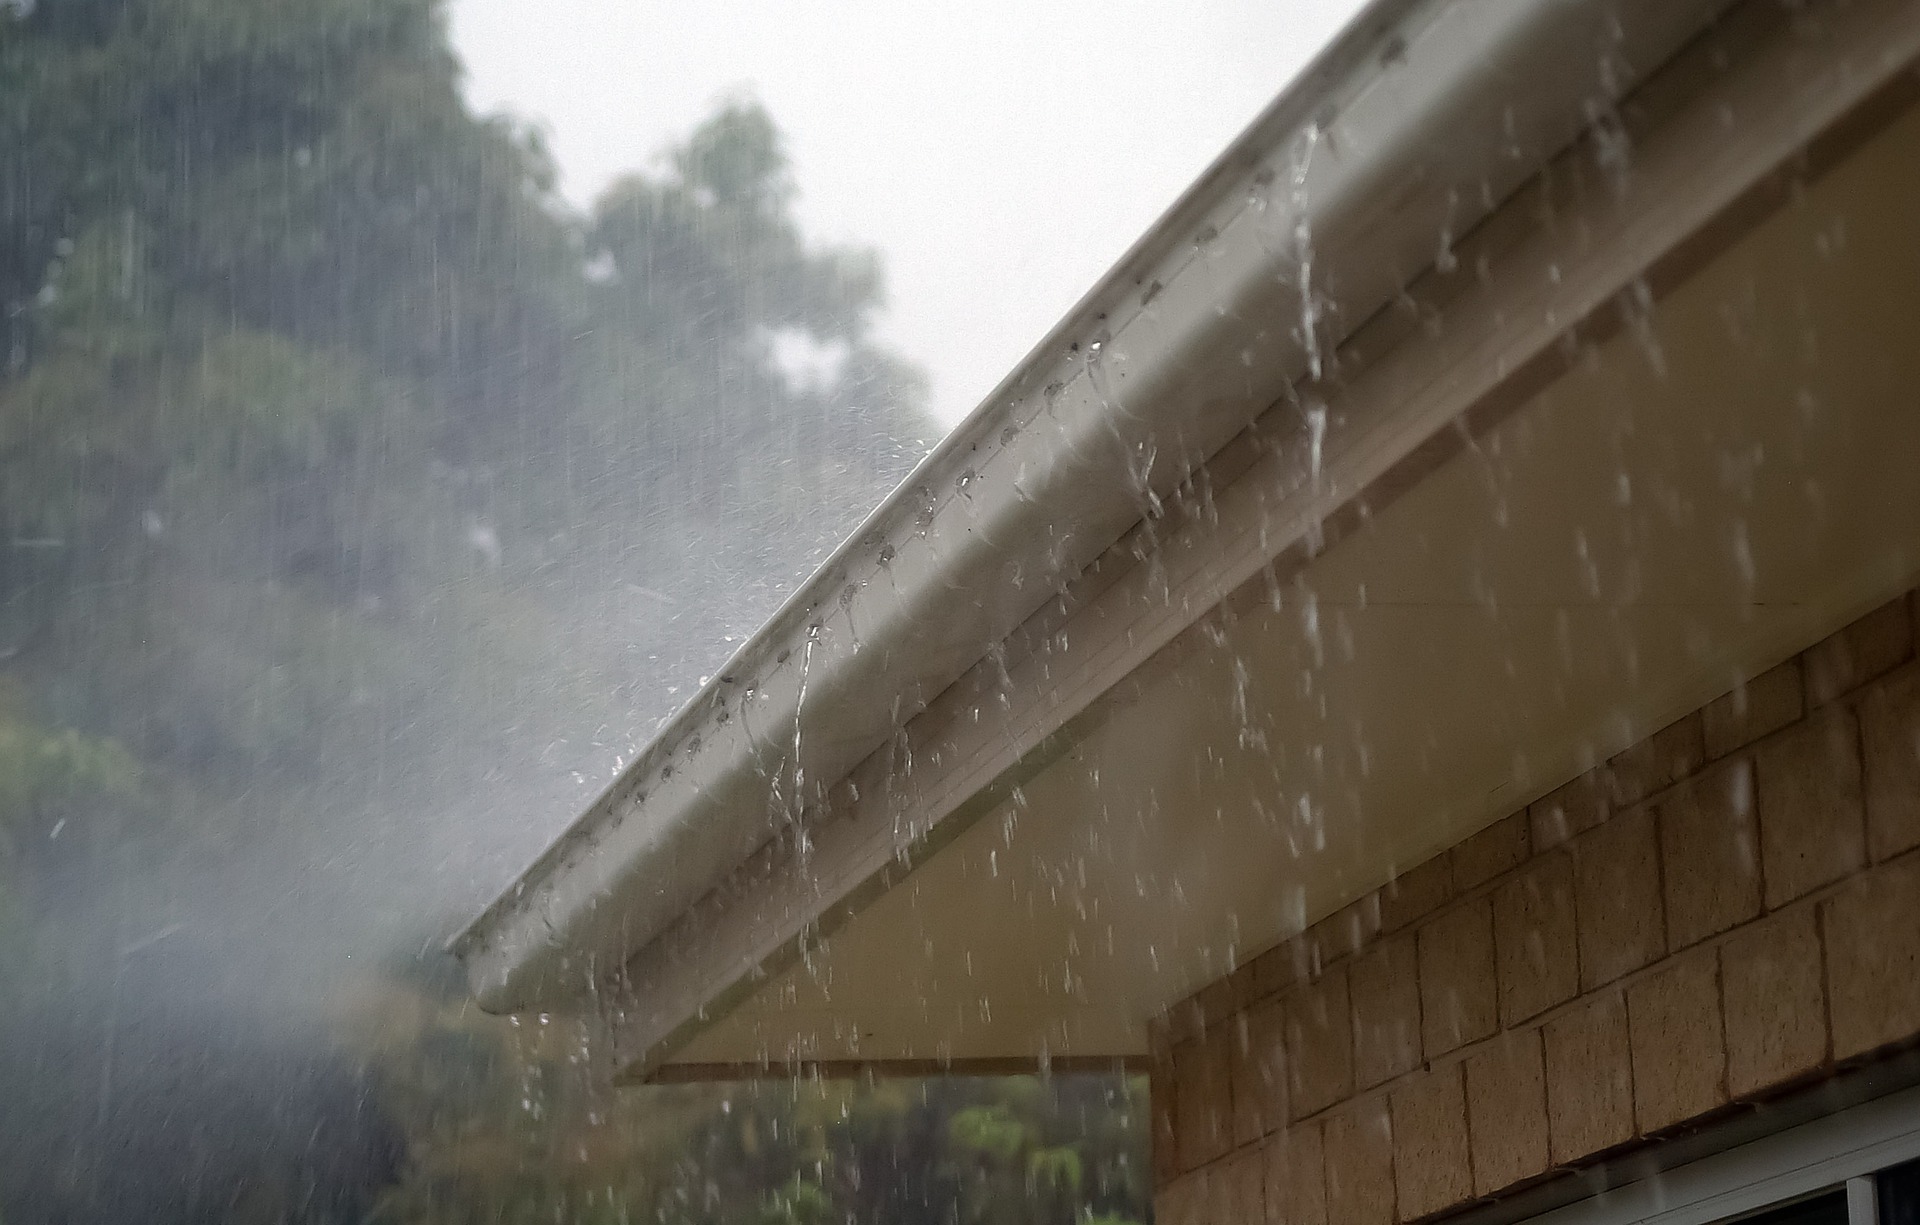 heavy rainfall filling gutter up with rainwater